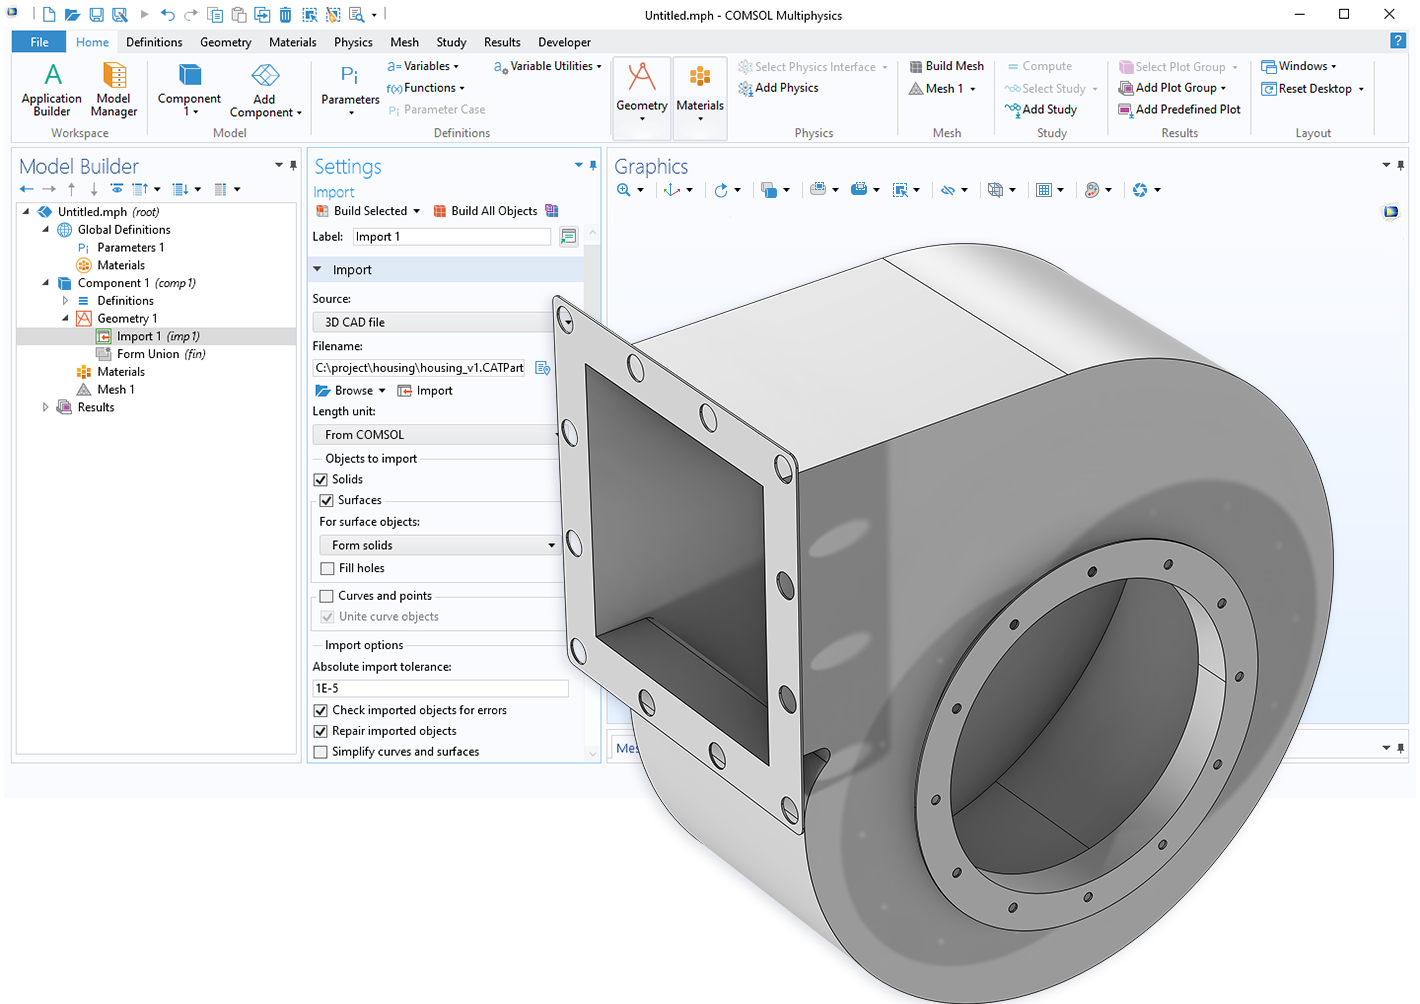 A geometry for an industrial fan design imported from a CATIA V5 file overlaid on a COMSOL Multiphysics UI, showing the settings for the Import node.